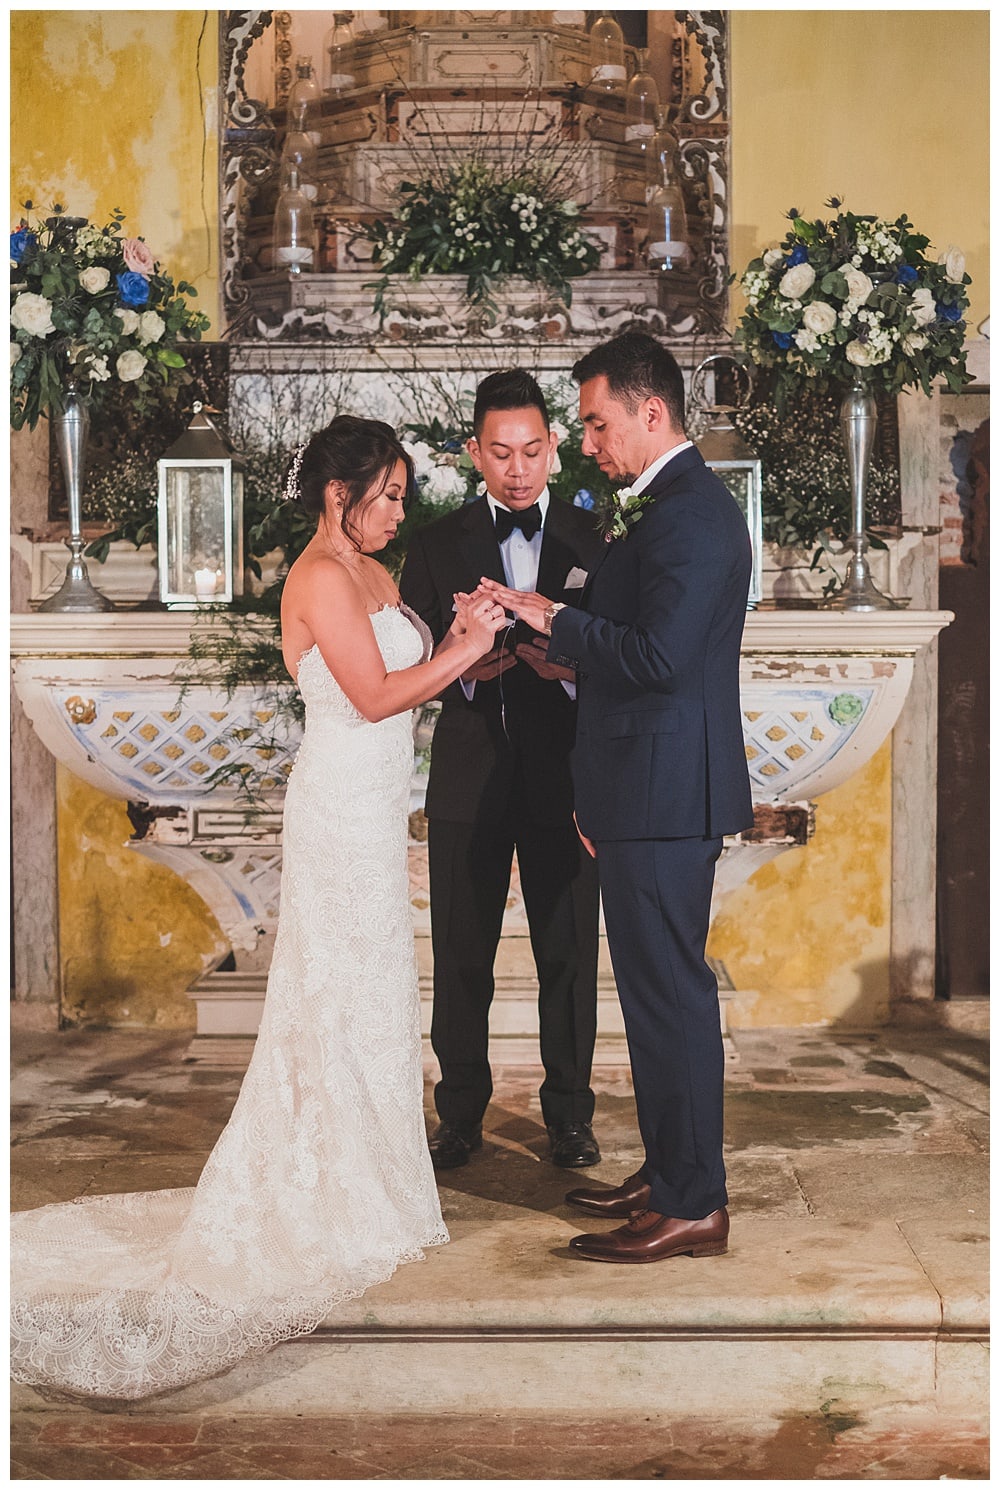 rings and vows of bride and groom at the aisle intimate wedding at Quinta My vintage #brideandgroom #vows #weddingceremony #sintrawedding #quintamyvintagewedding #aisle